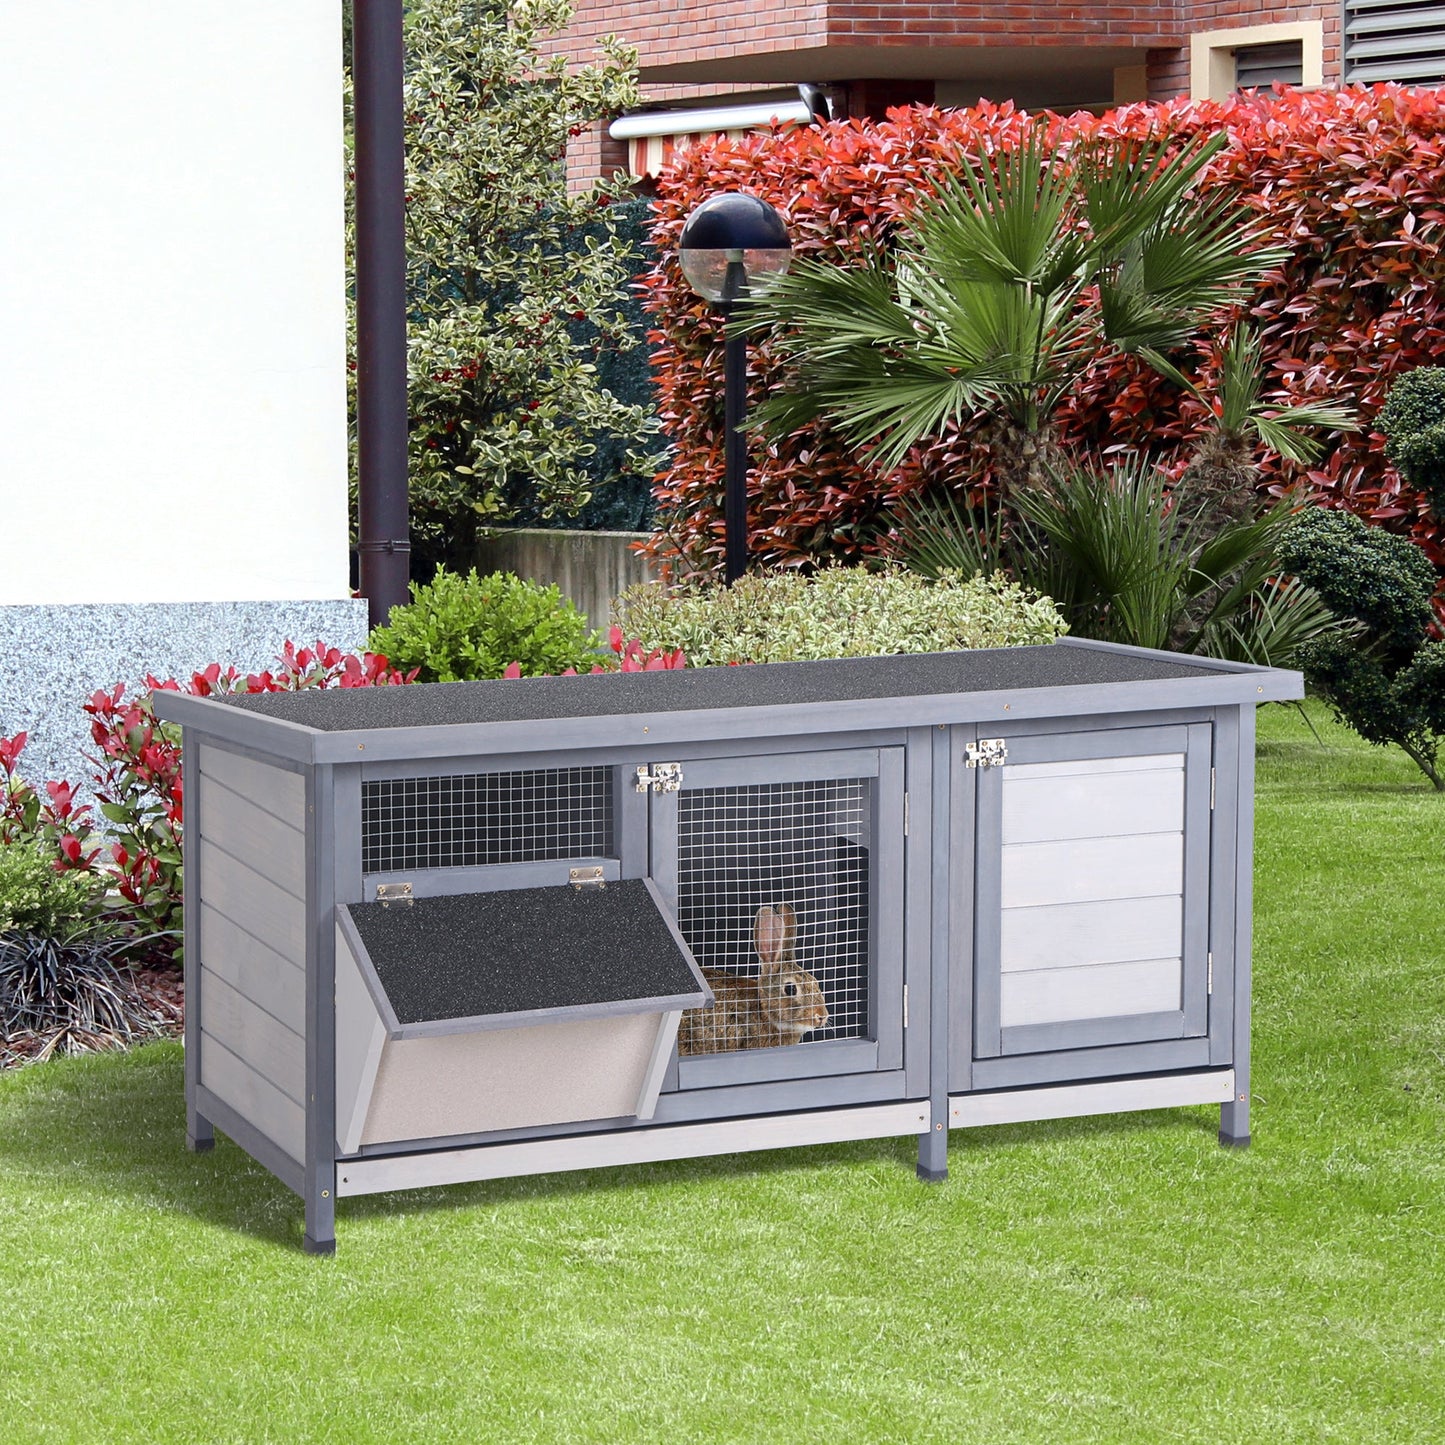 -PawHut Wooden Rabbit Hutch Bunny Hutch Cage Guinea Pig with Waterproof Roof, No Leak Tray and Feeding Trough, Indoor/Outdoor, Grey - Outdoor Style Company